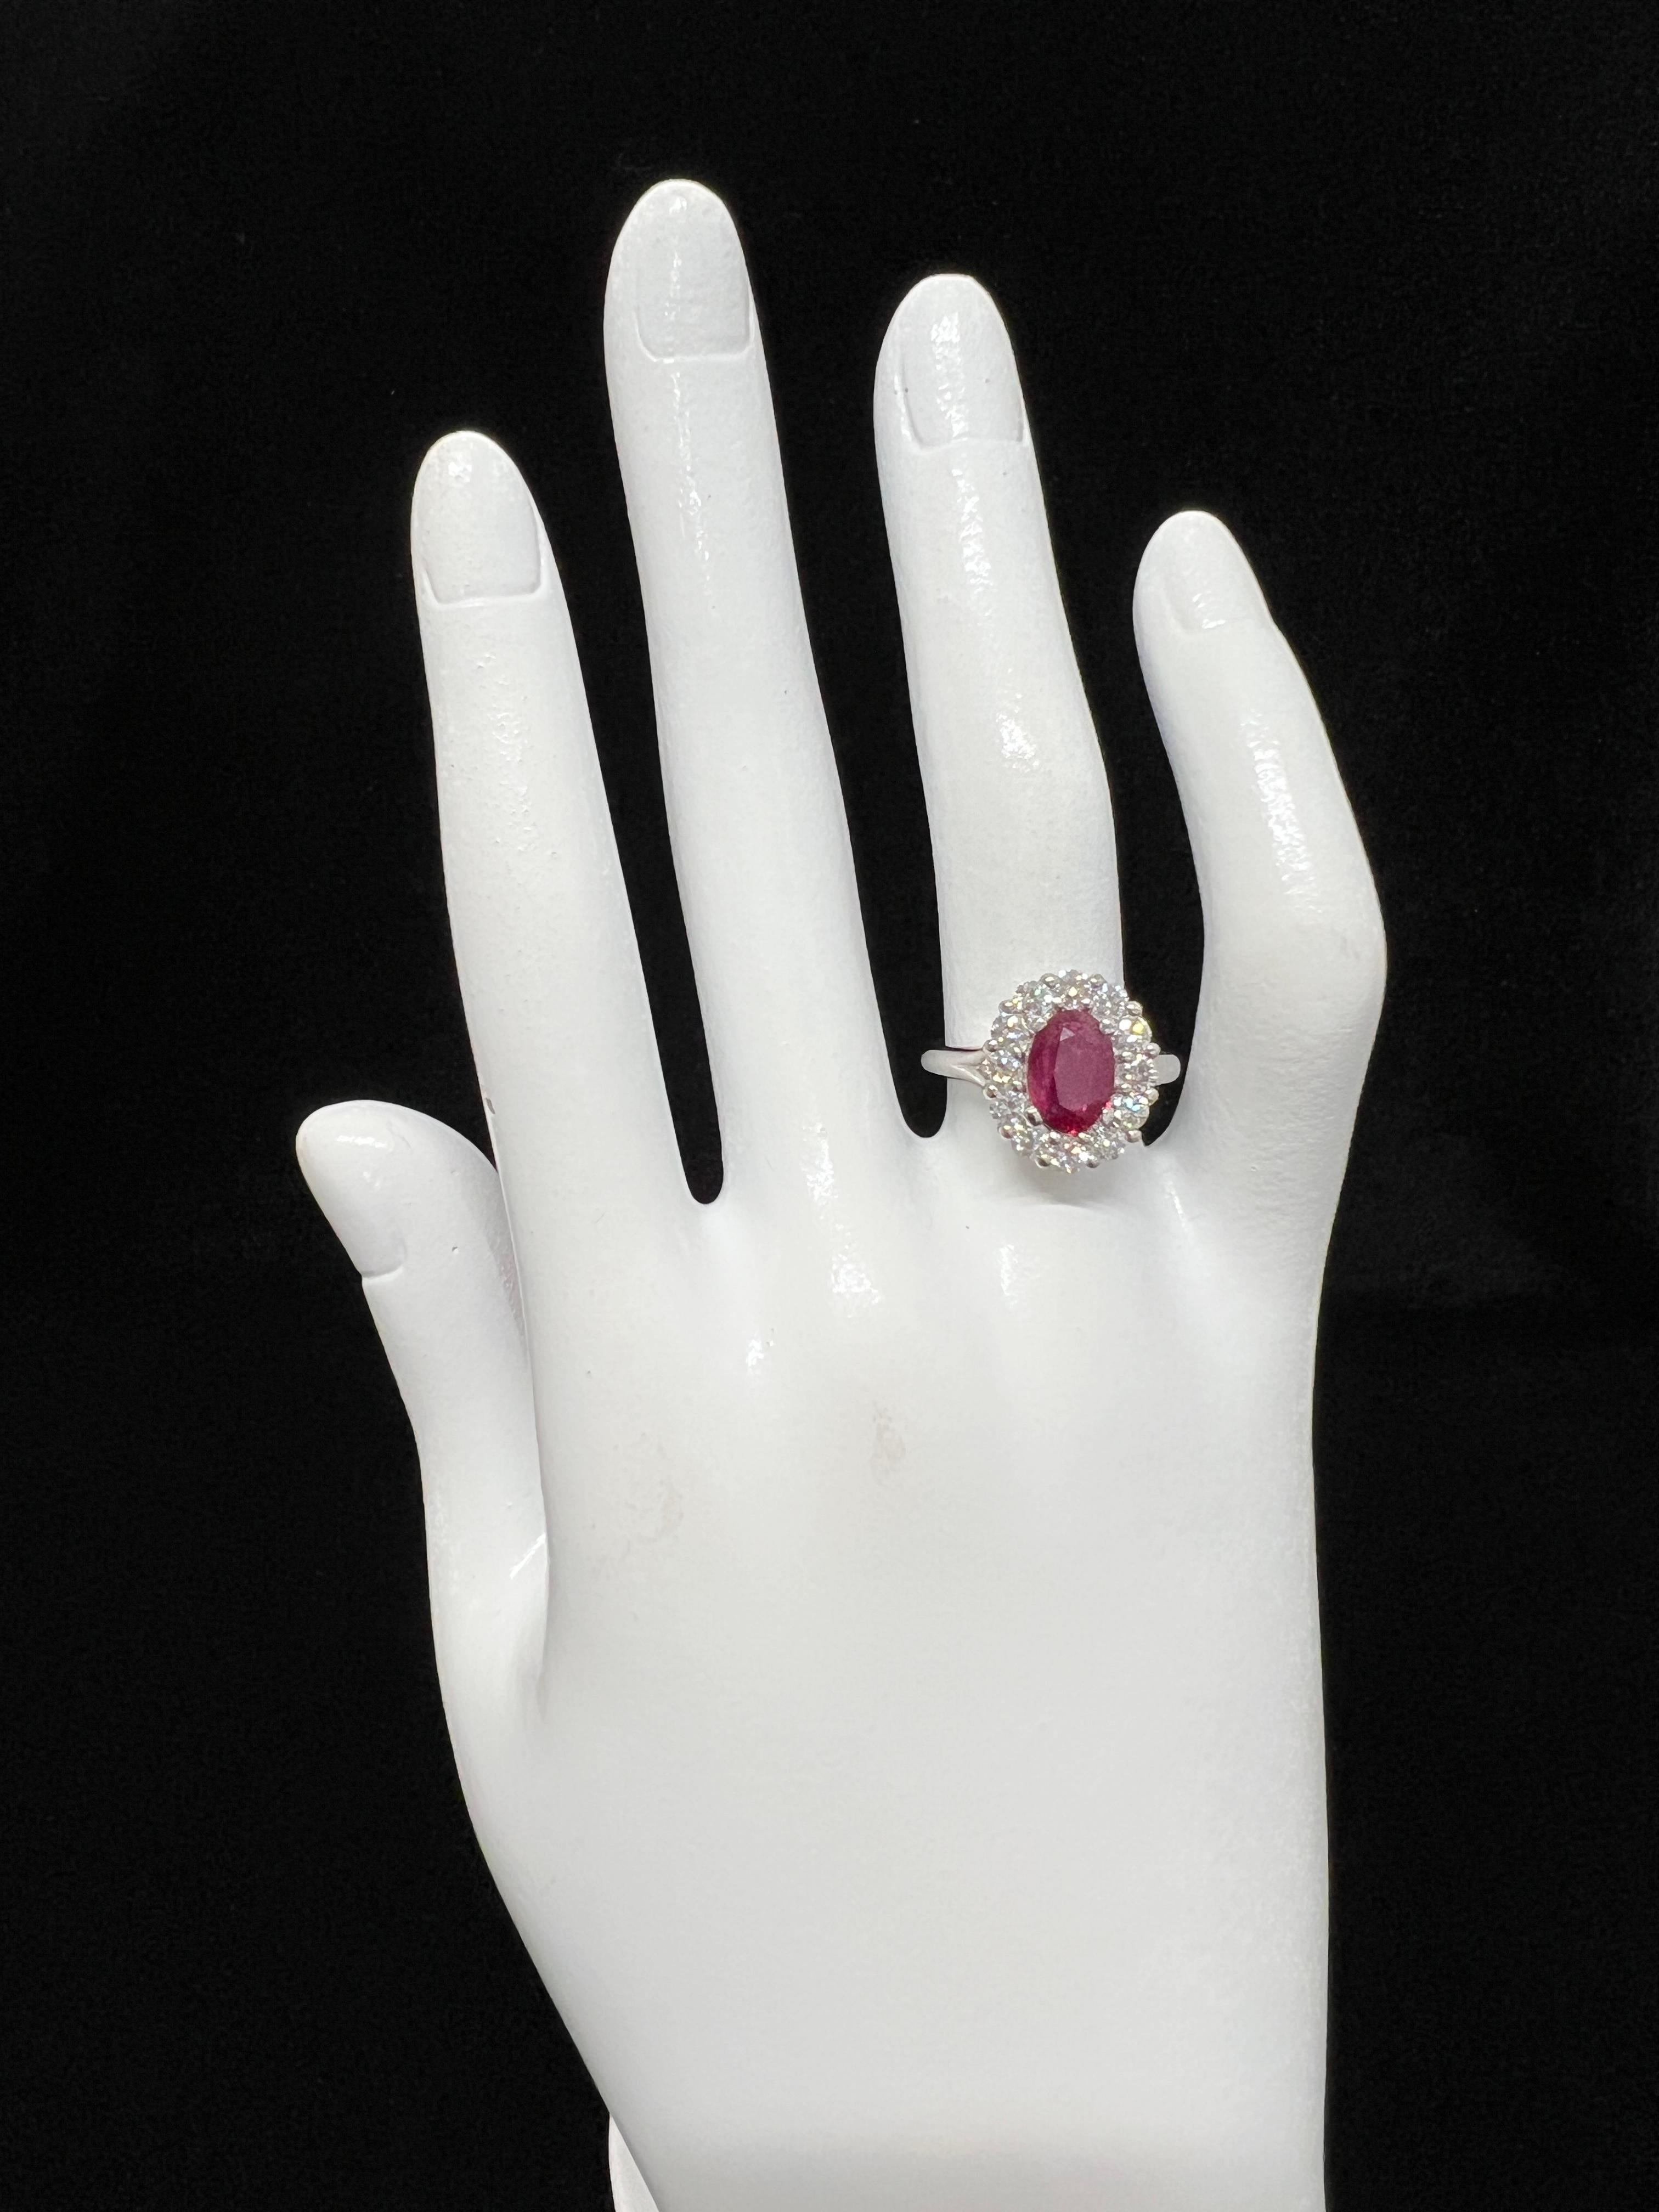 GRS Certified 1.51 Carat Unheated Pigeon's Blood Color Ruby Ring Set in Platinum 1